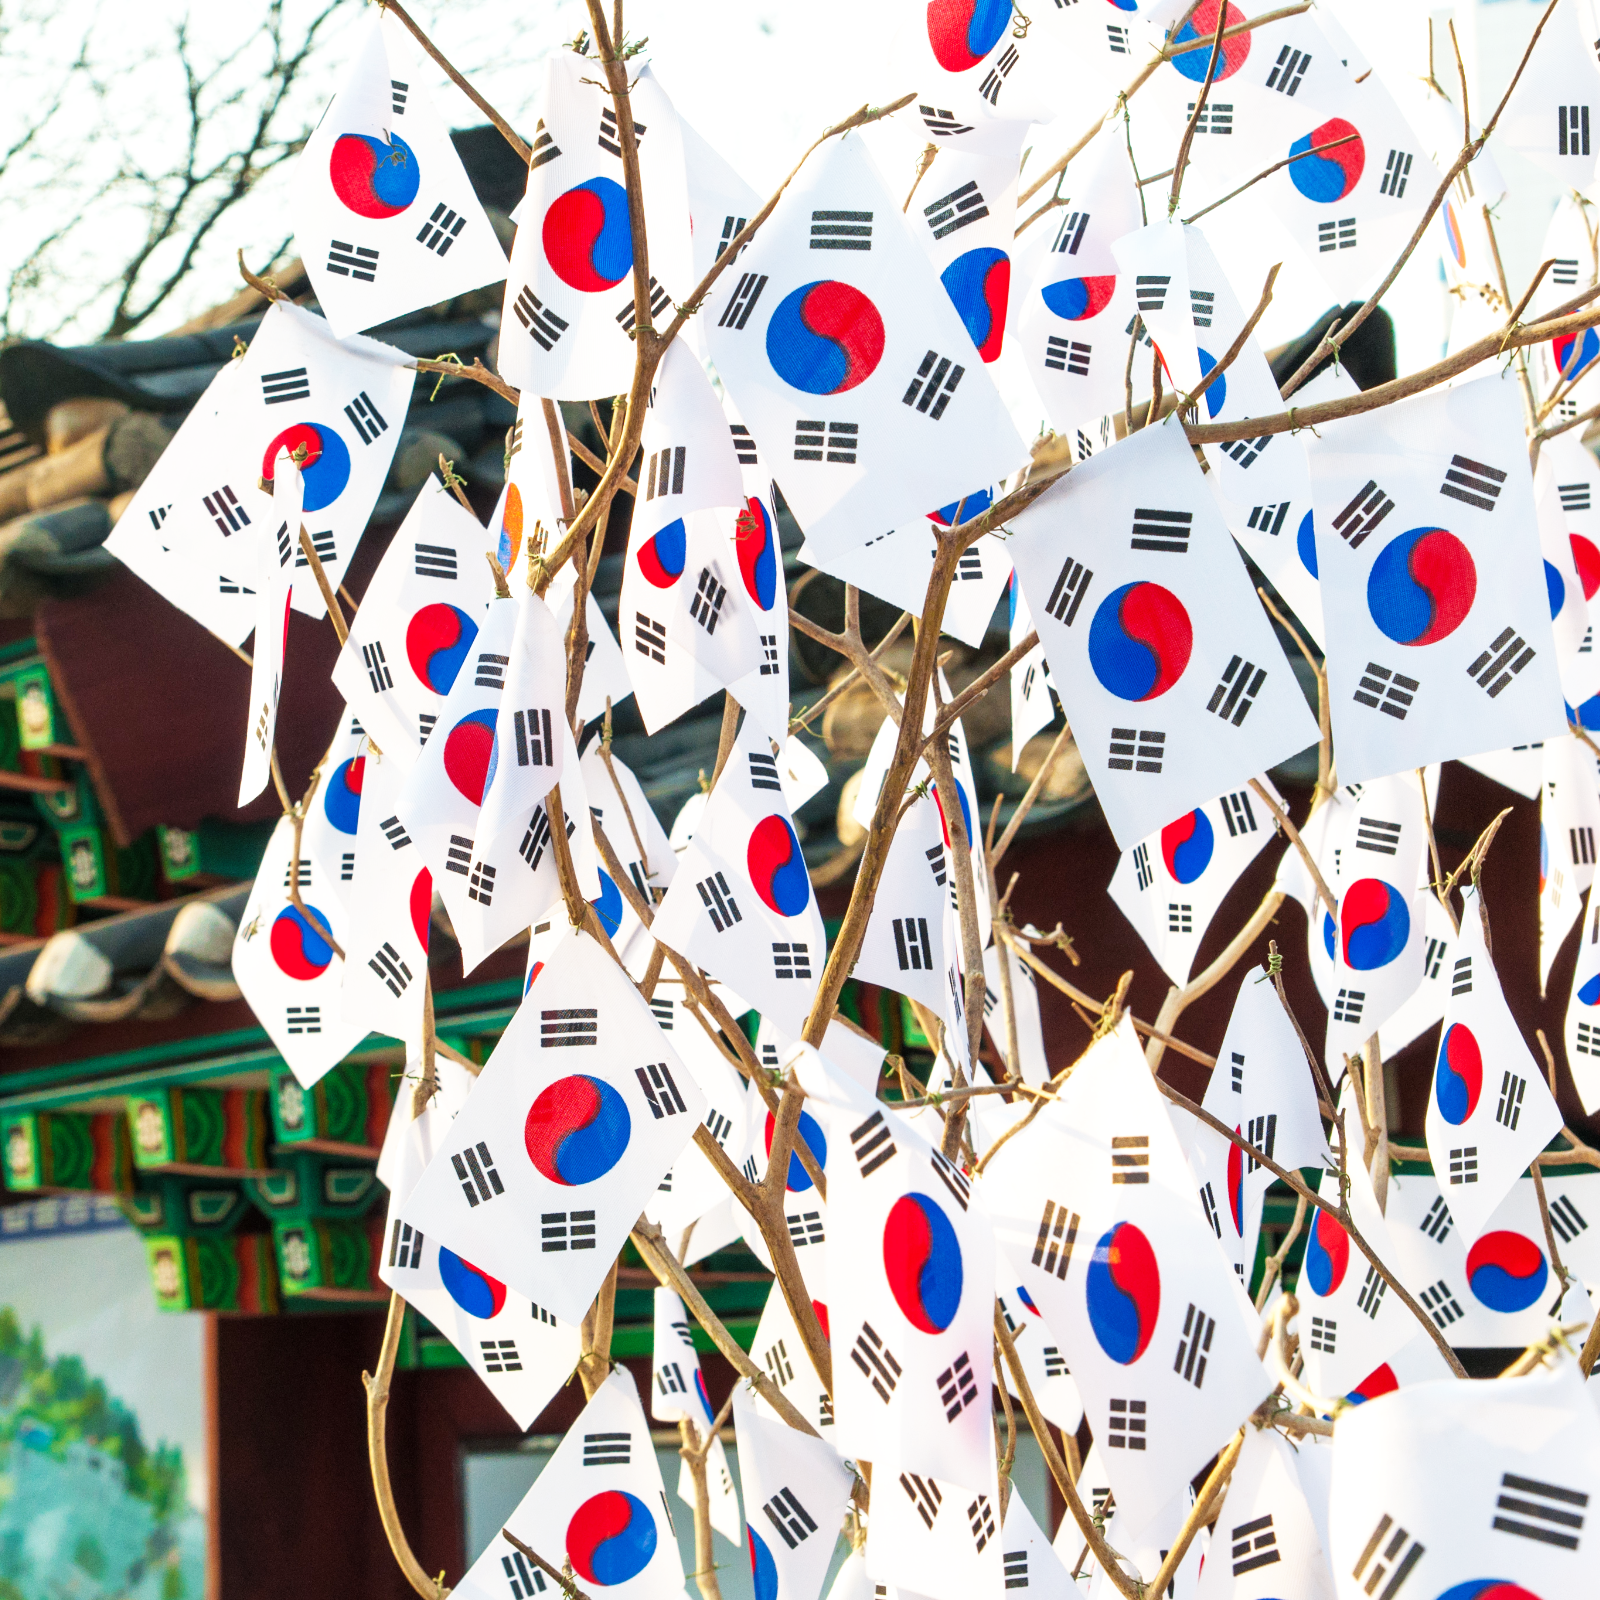 South Korea Updates ICO Policy After 3-Month Investigation